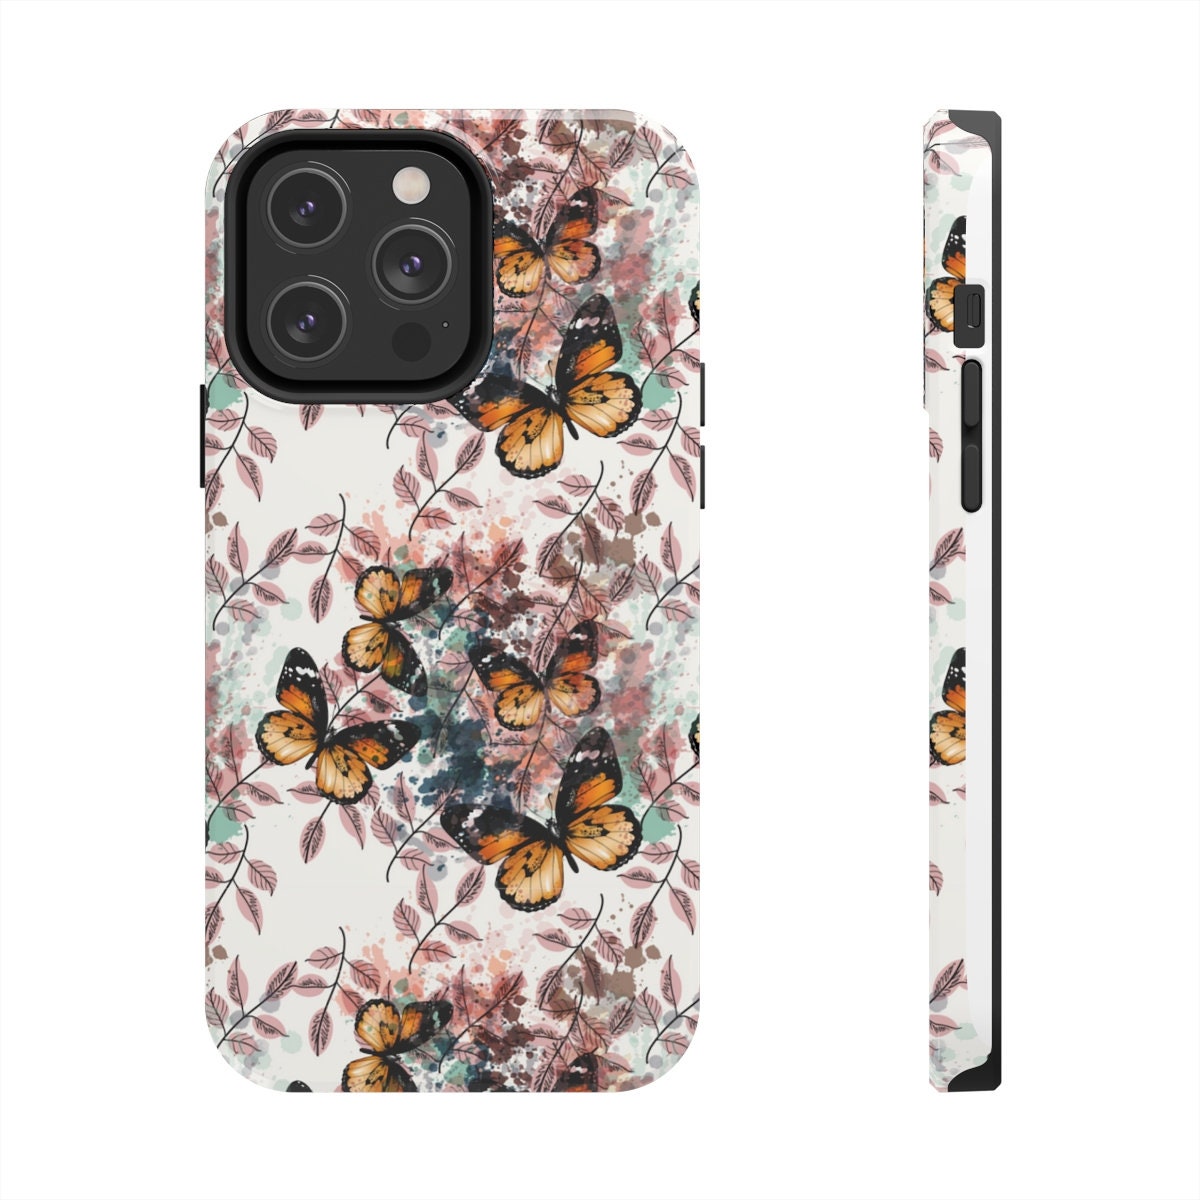 Aesthetic Phone Case, Butterfly Cottagecore Design. Phone Case Aesthetic Design, Trendy Vintage Butterfly iPhone Galaxy Phone Case,